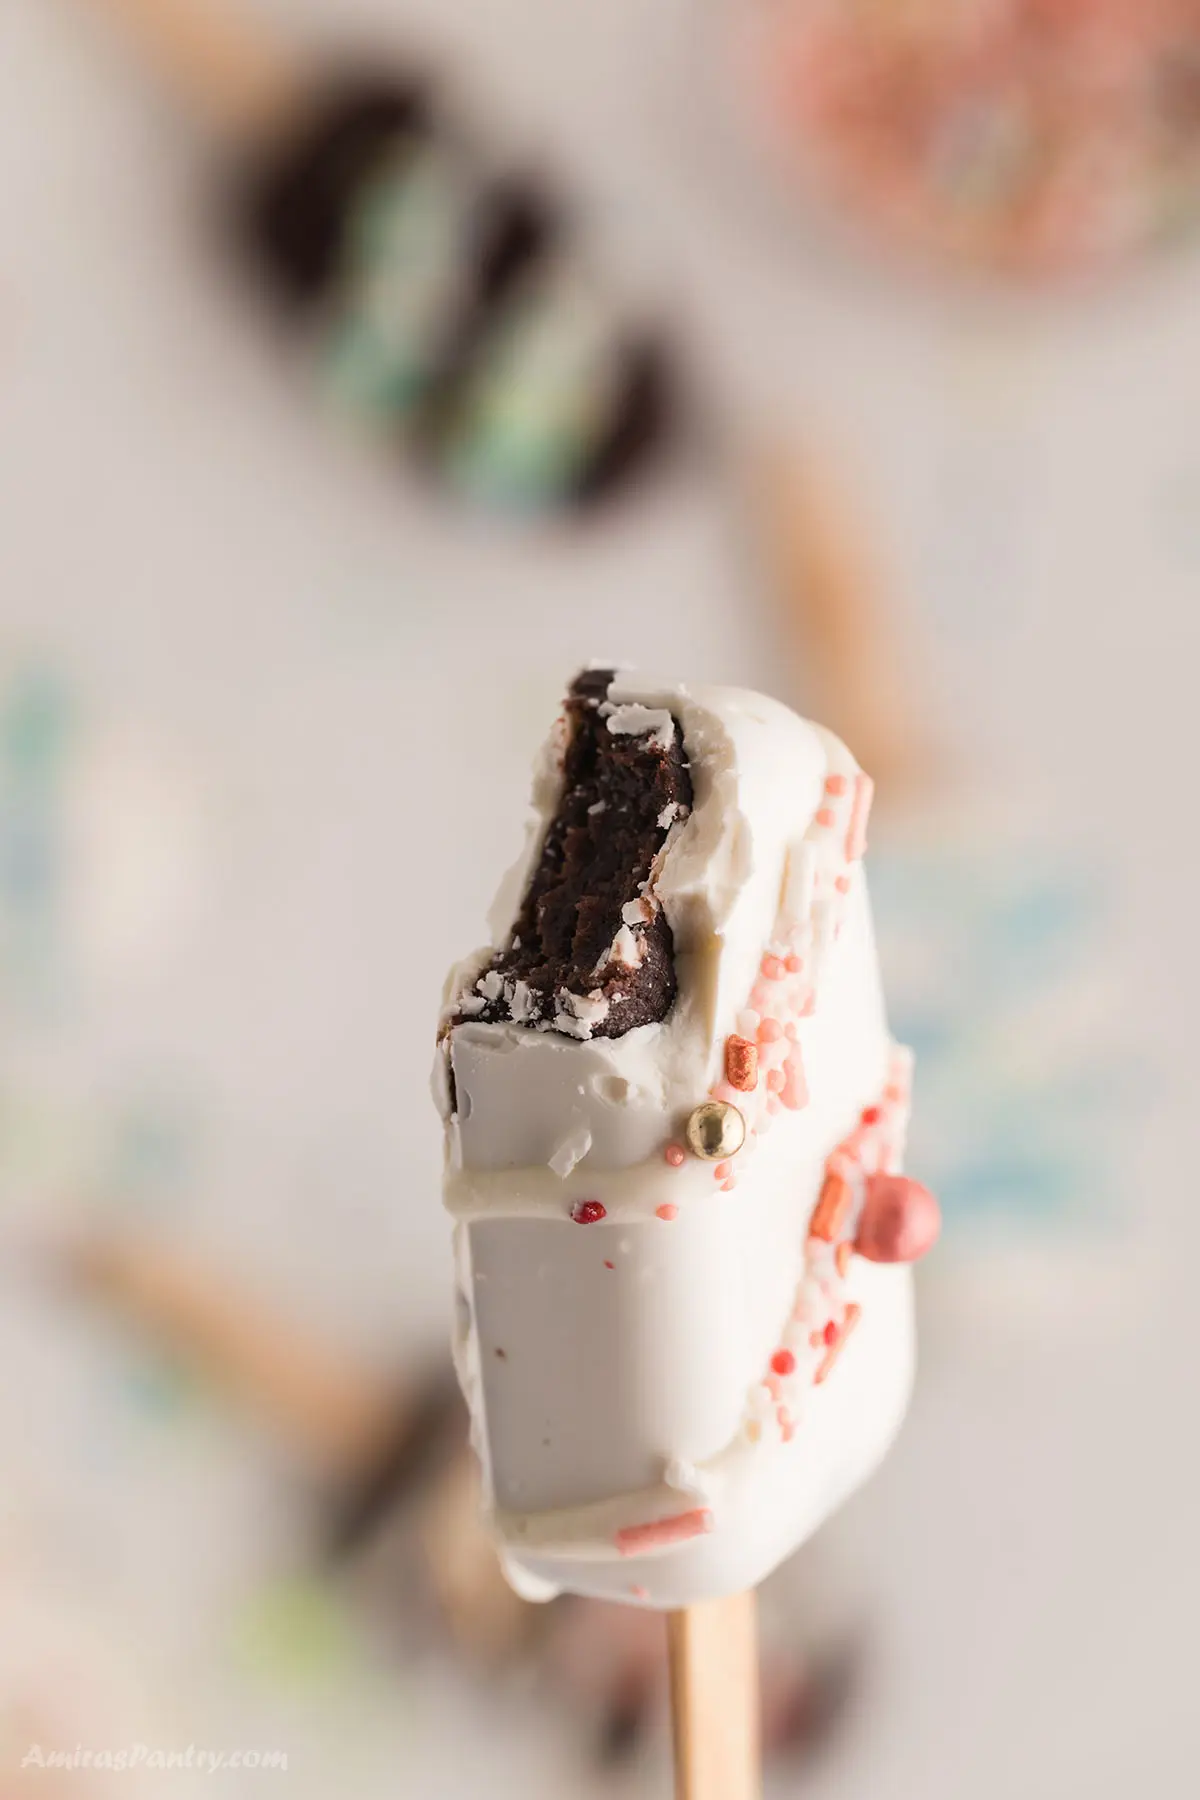 One cake popsicle covered in white chocolate with a bite taken to show texture.